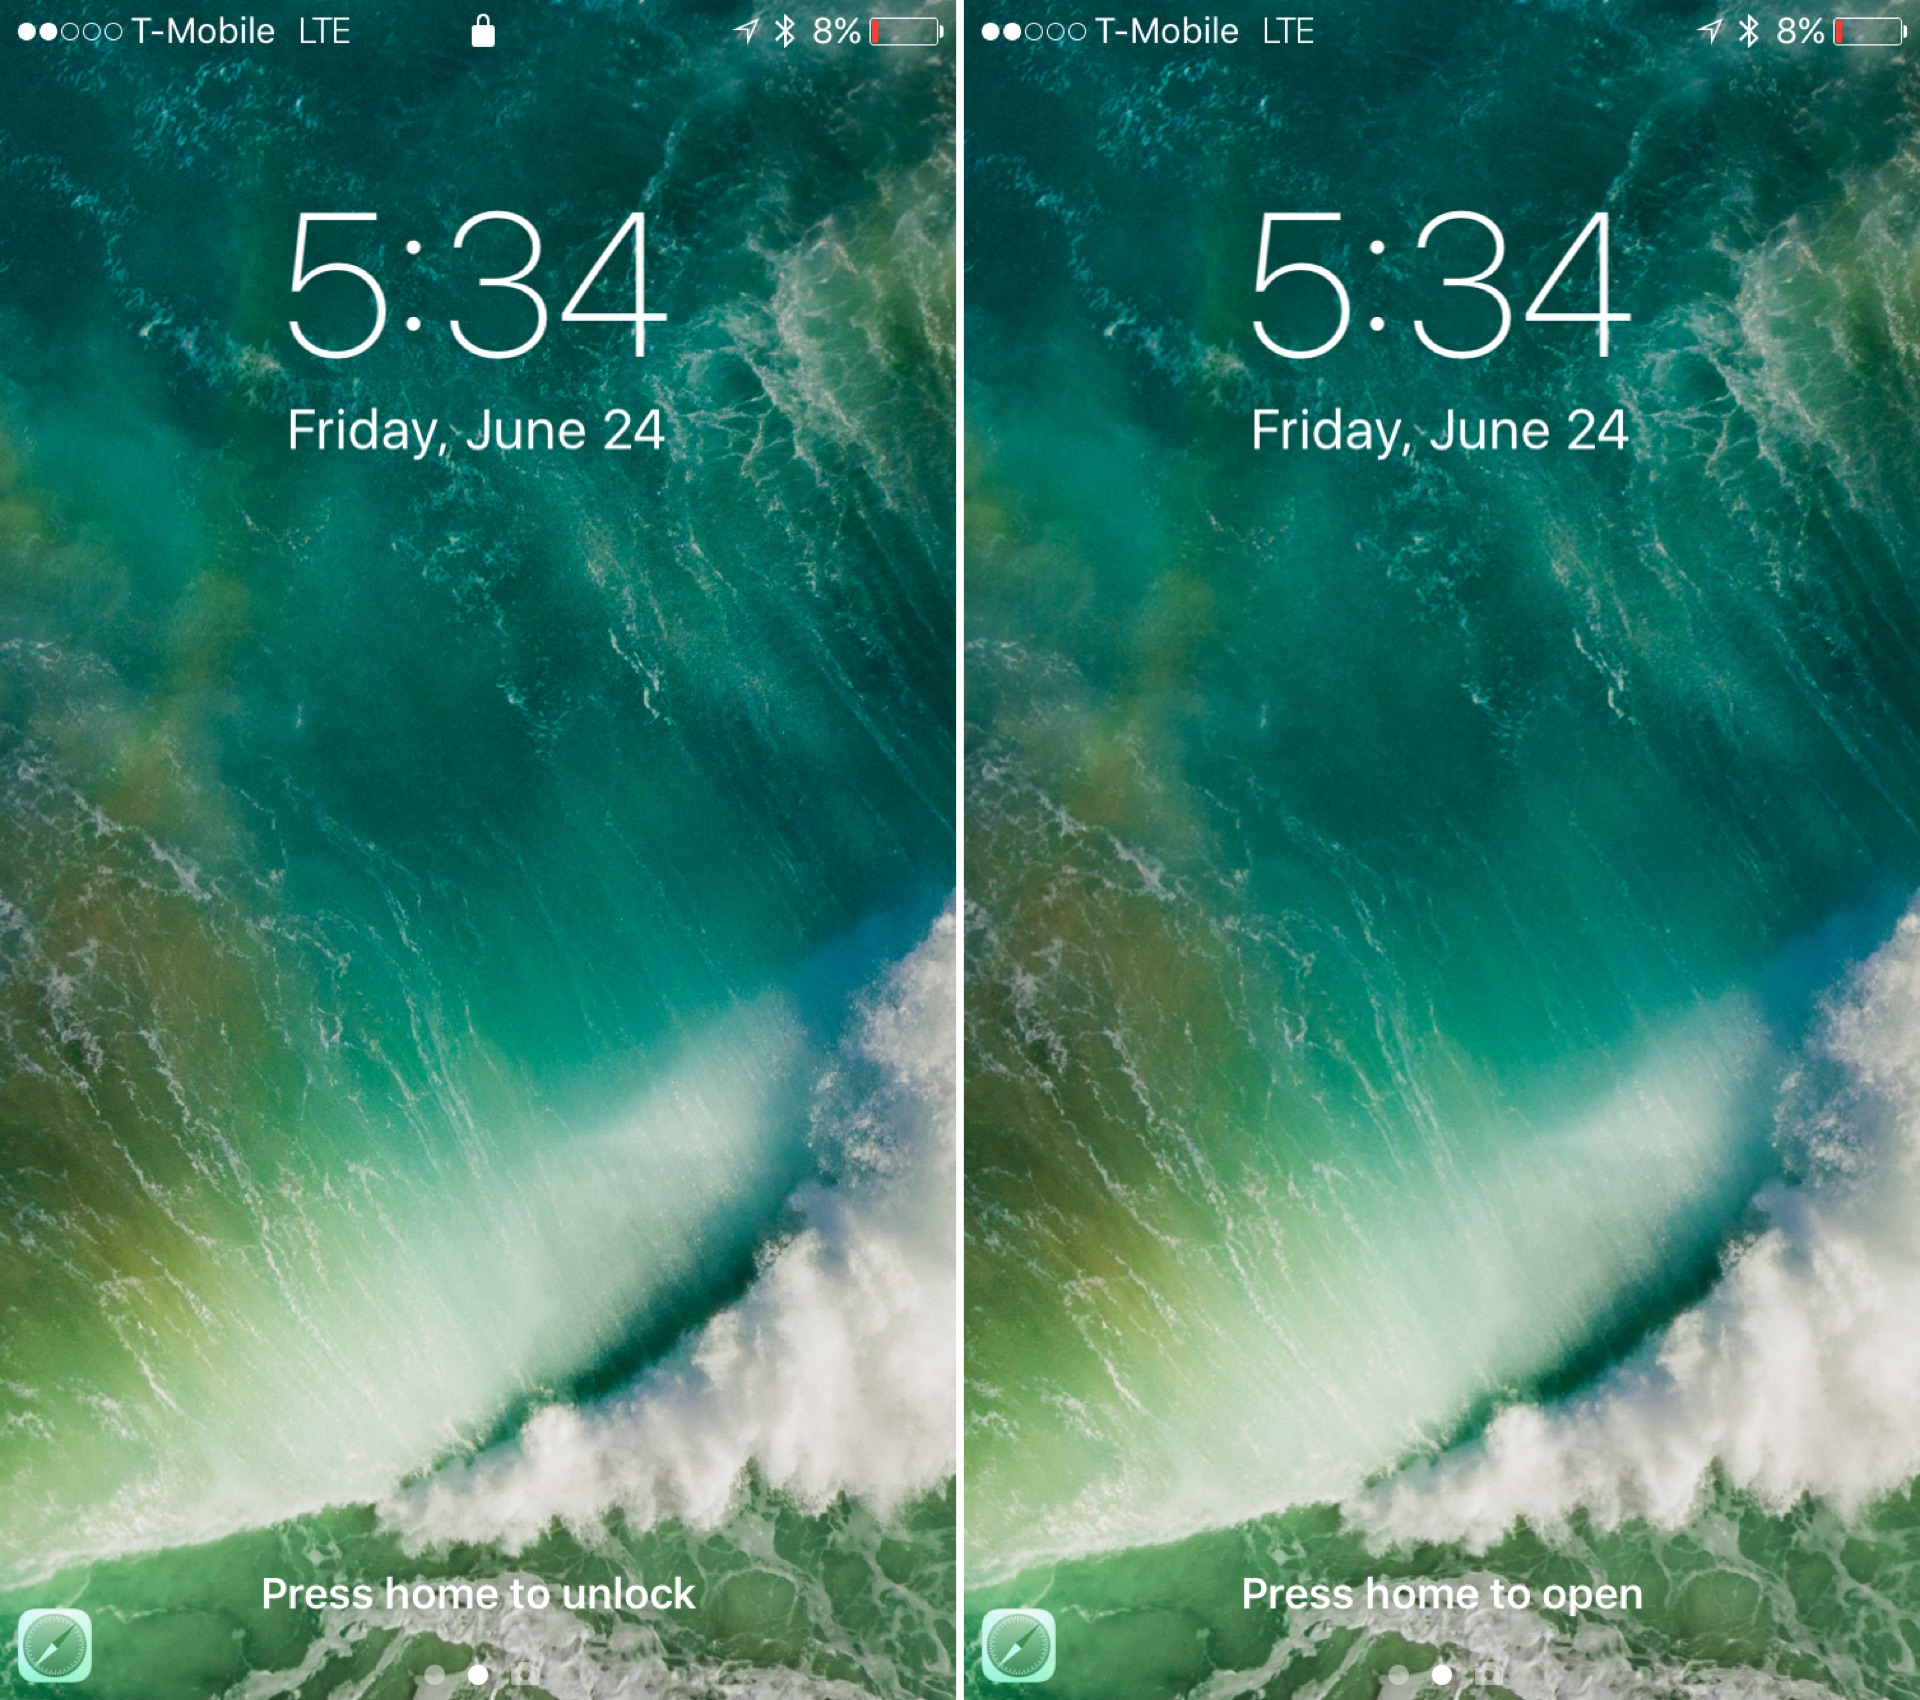 iOS 10: Hands-on with the new Lock screen [Video] - 9to5Mac